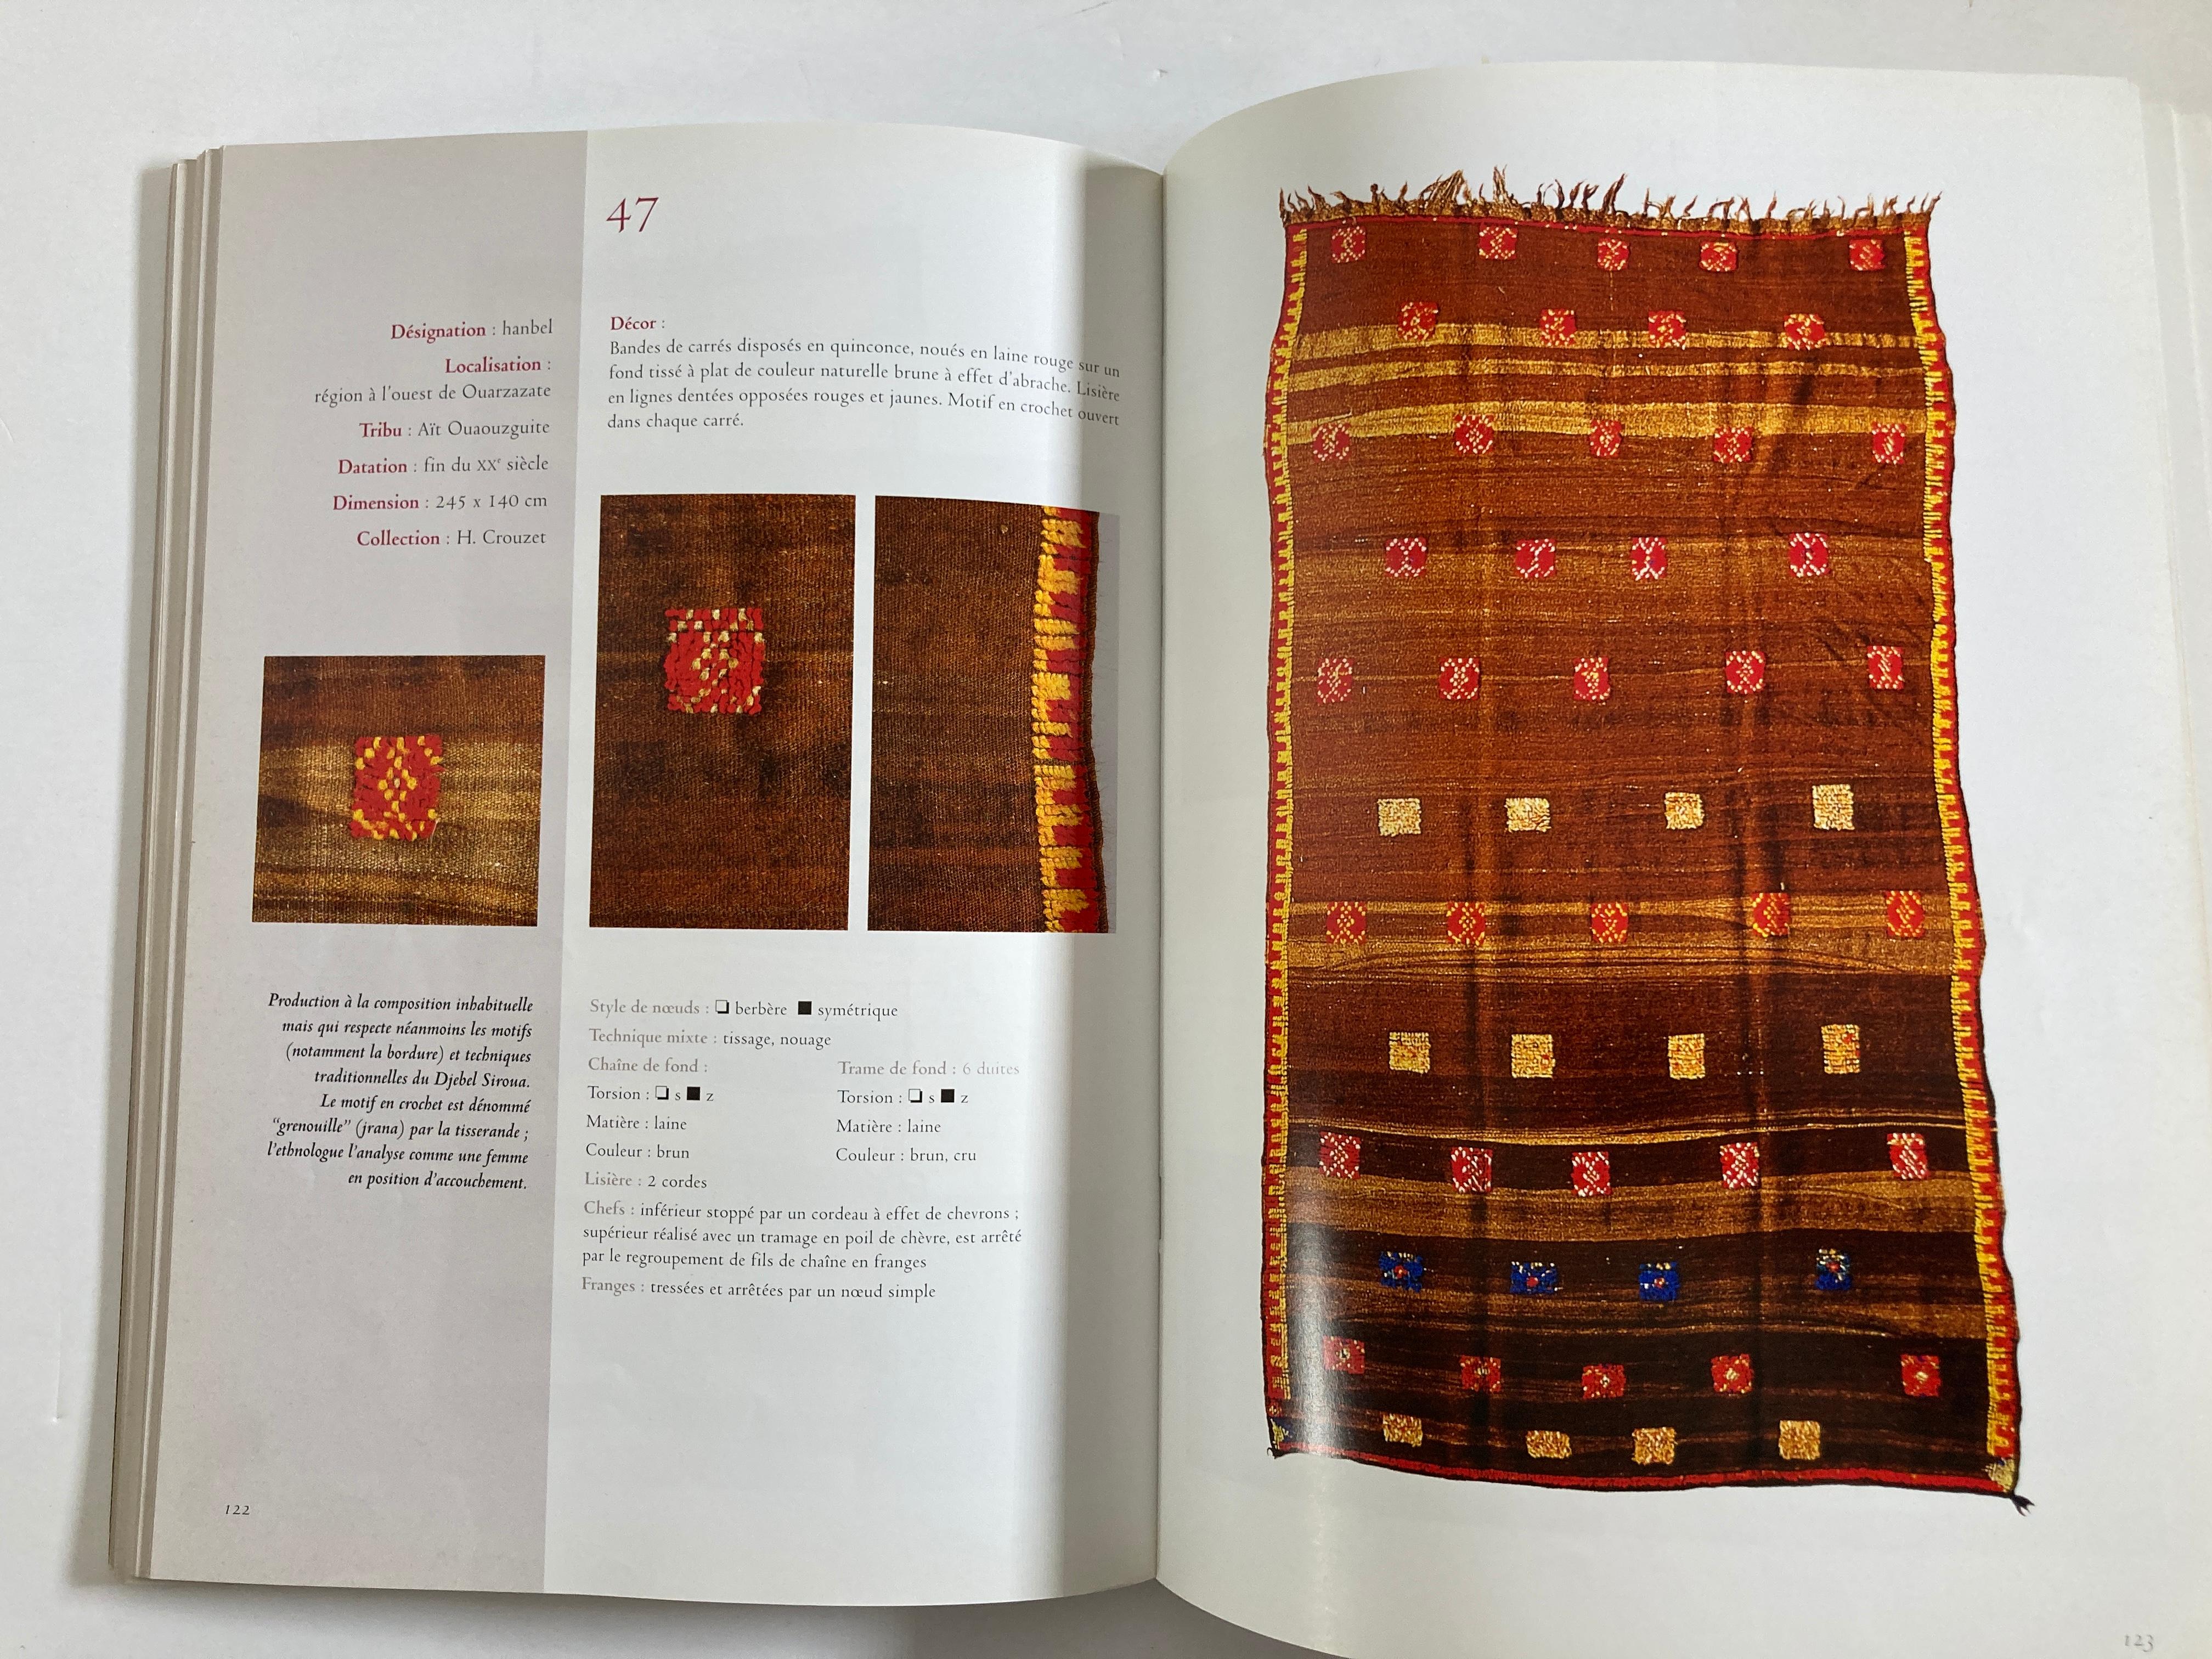 Maroc Tapis de tribus 'French' Moroccan Tribal Rugs Paperback Book For Sale 2